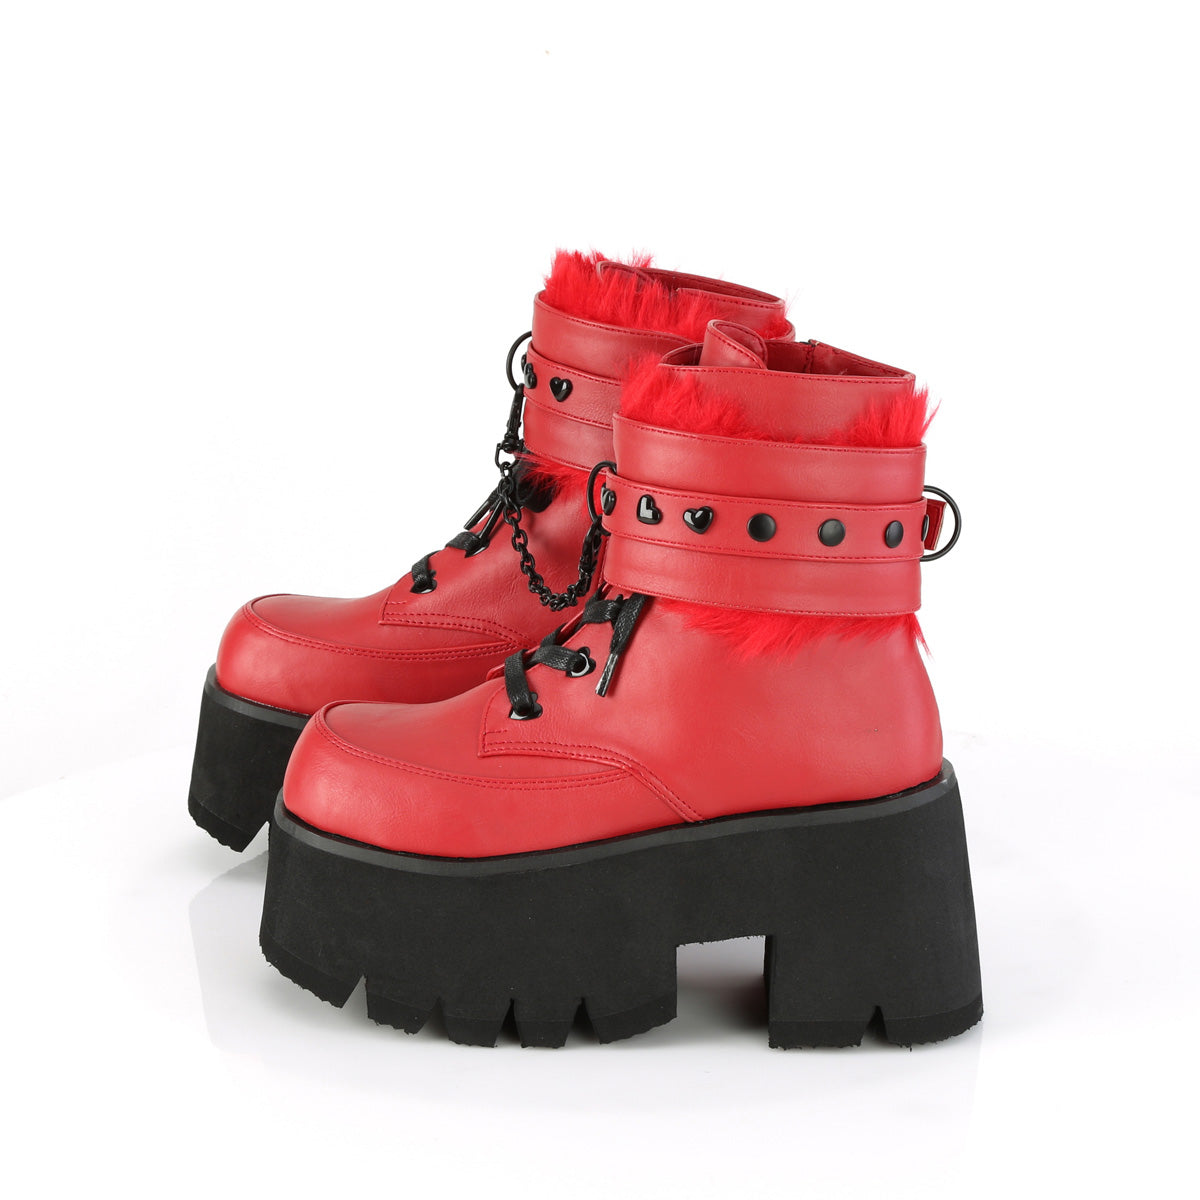 ASHES-57 Demoniacult Alternative Footwear Women's Red Chunky Platform Ankle Boots